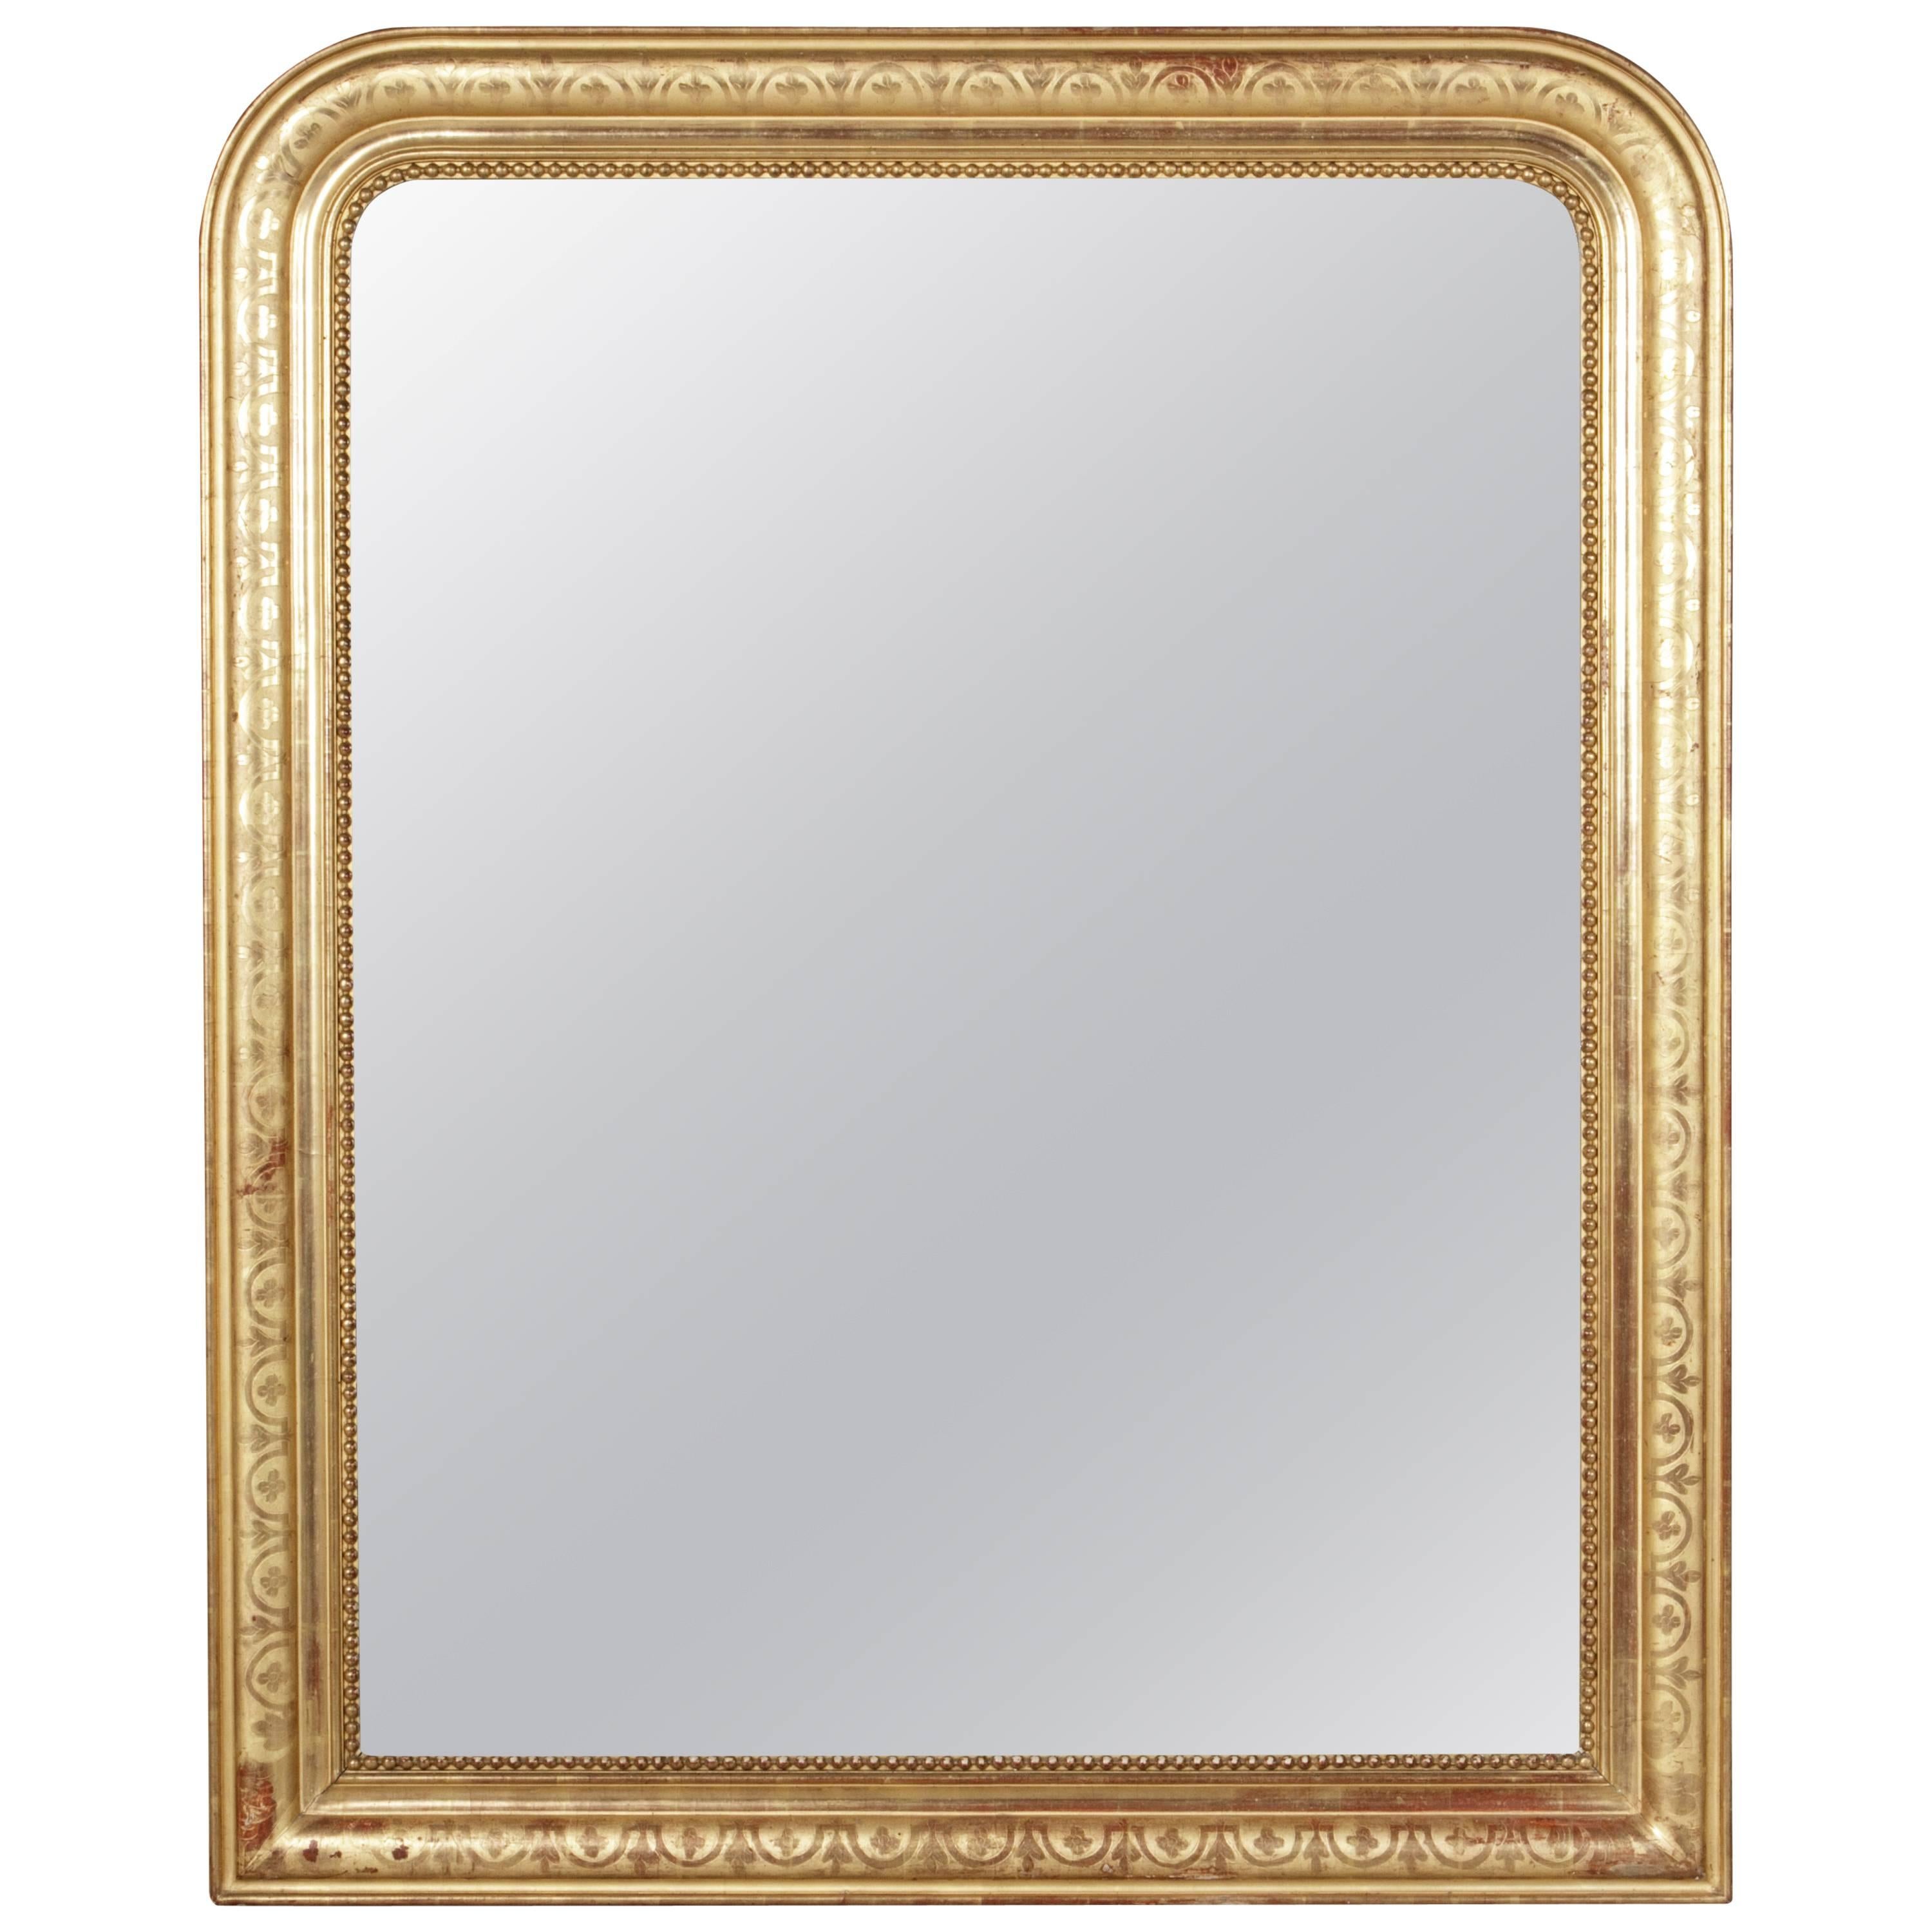 Large-Scale Giltwood Period Louis Philippe Mirror, France, circa 1830